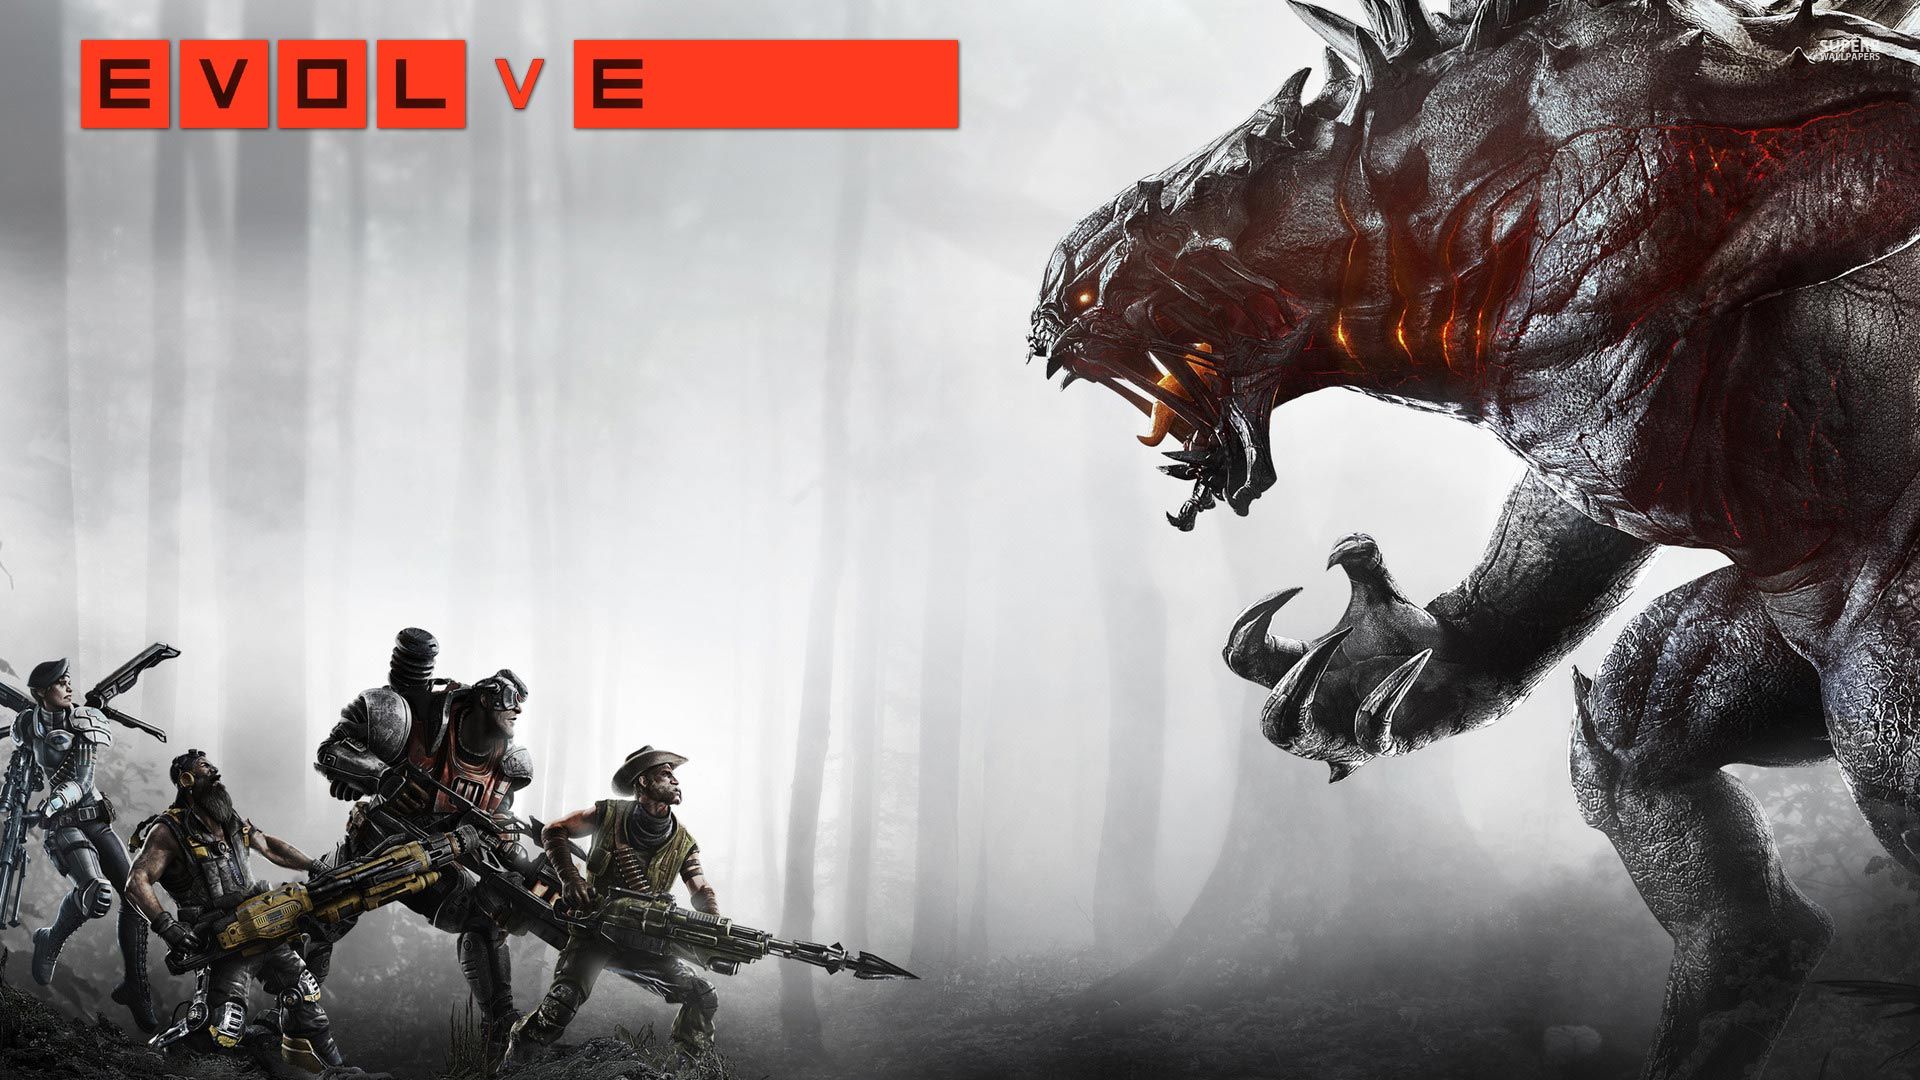 Evolve wallpaper in Hd 1080p in high resolution